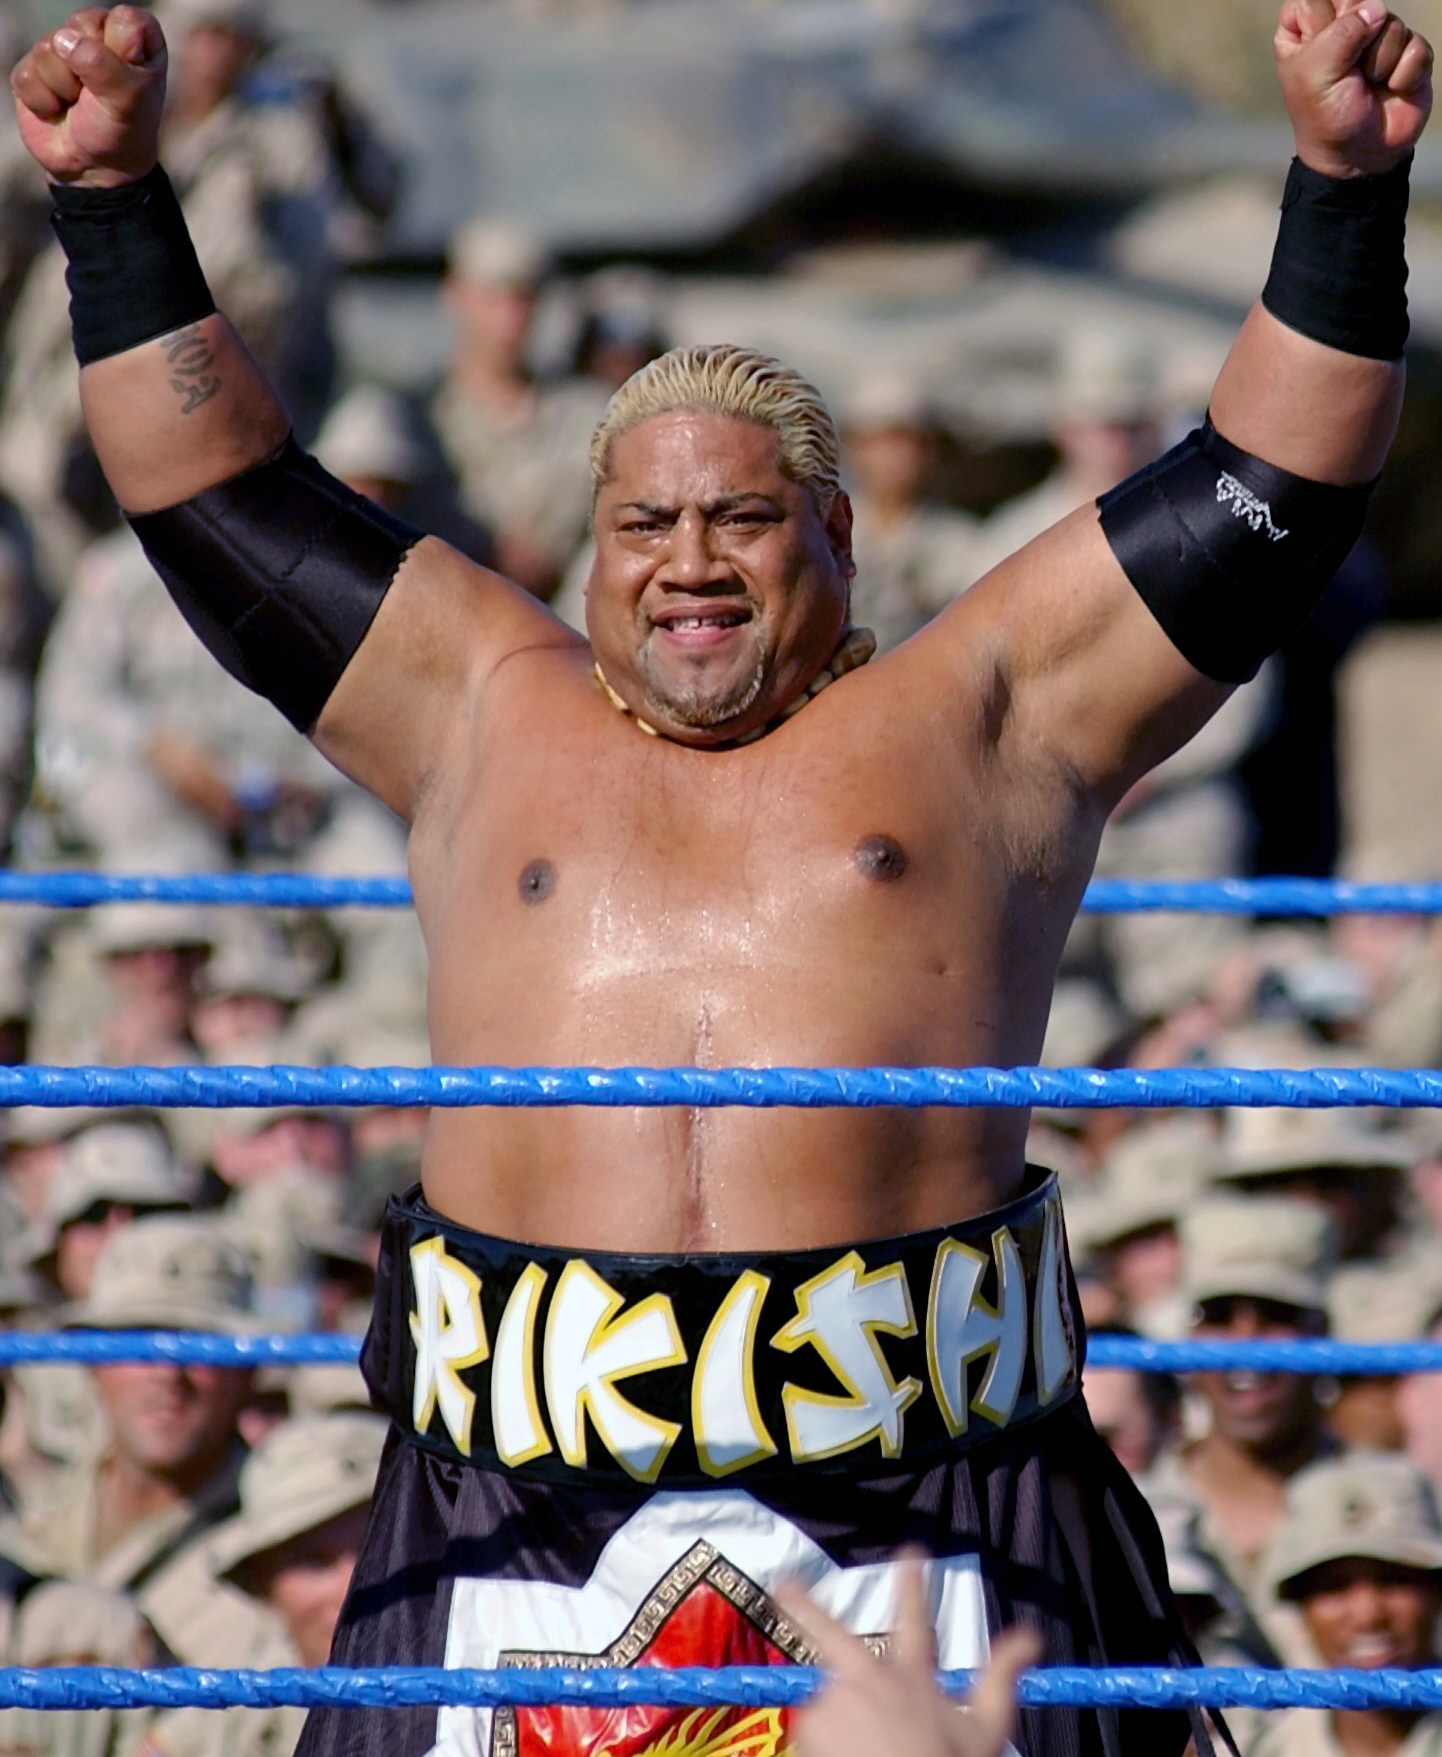 World Wrestling Entertainment (WWE) superstar Rikishi performs for the troops at Camp Victory, Baghdad International Airport (BIAP), Iraq (IRQ) during Operation IRAQI FREEDOM.